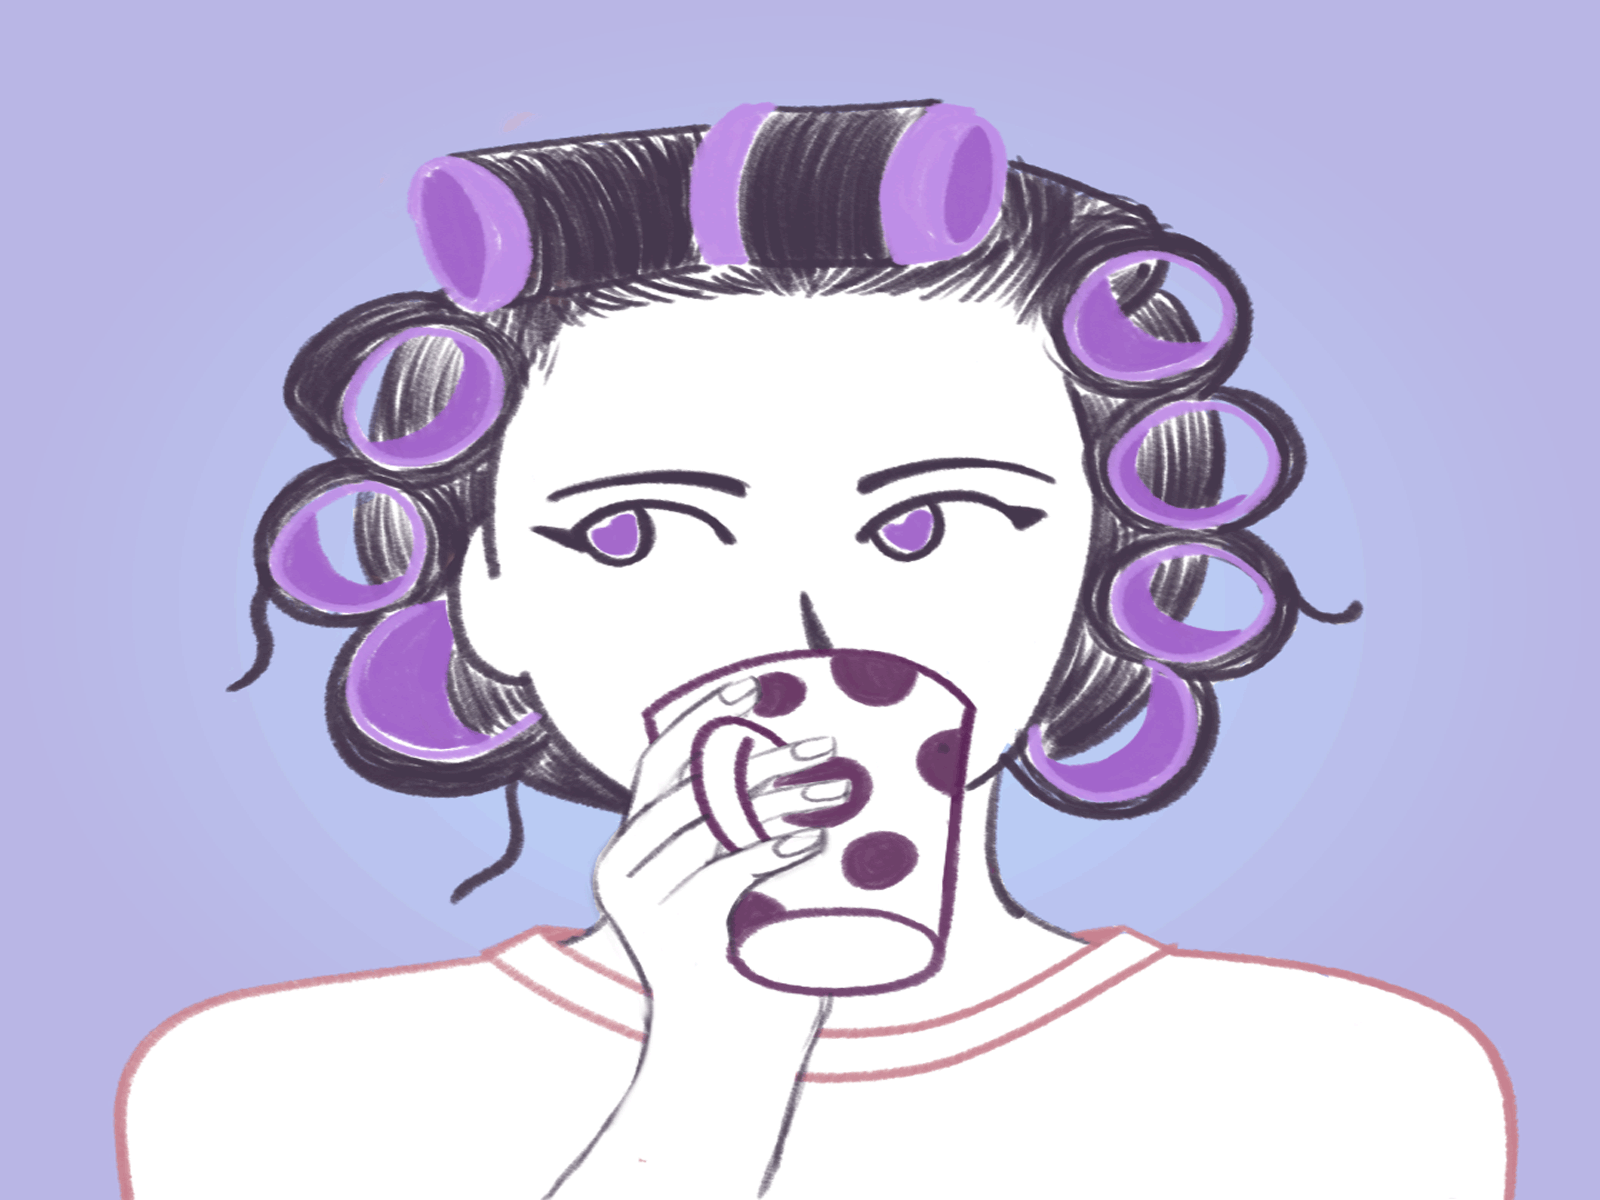 Today is hair curlers day 2d animation framebyframeanimation mood photoshop purple